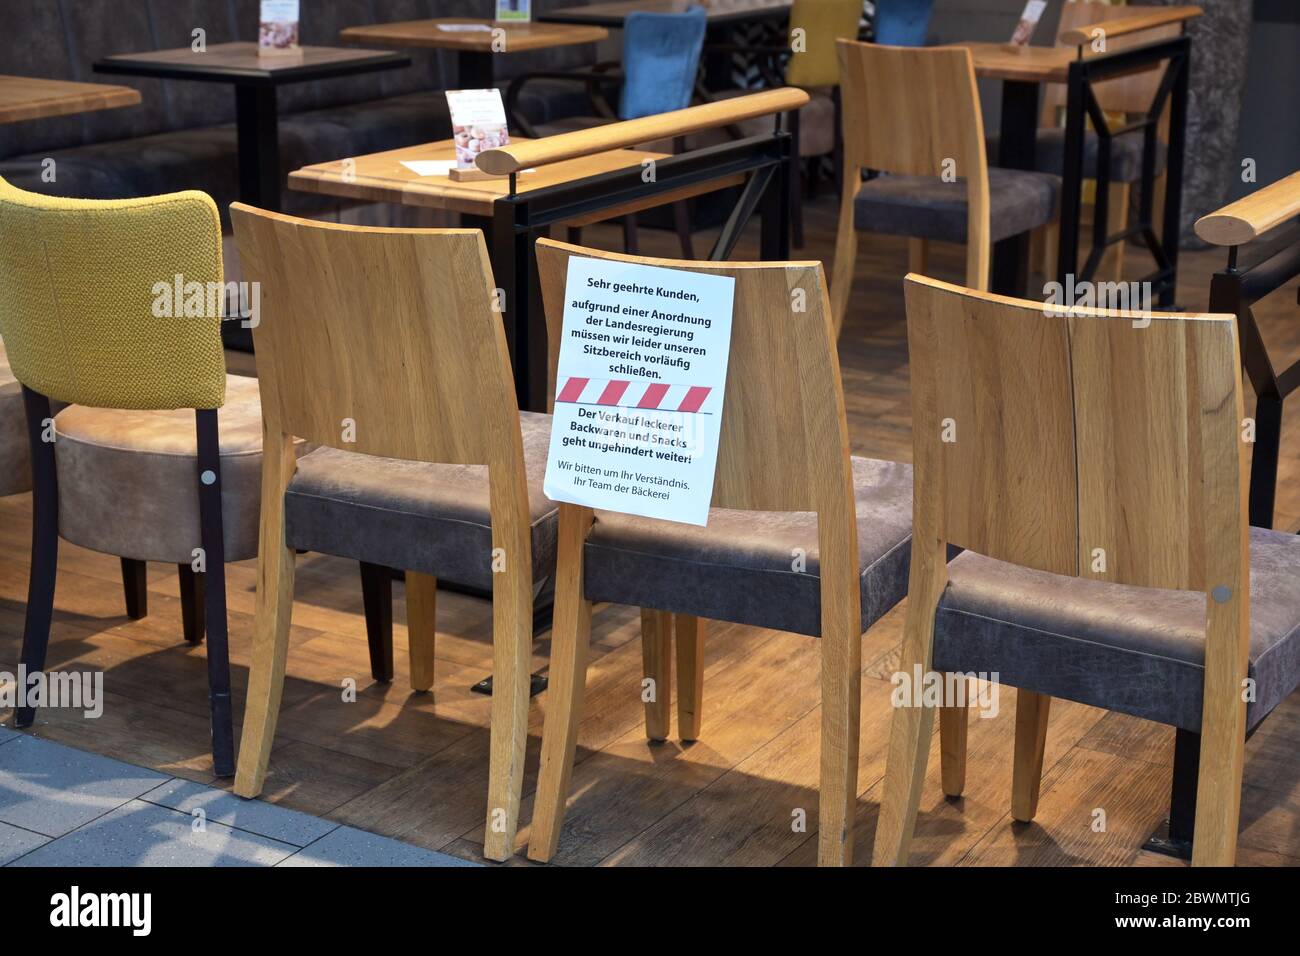 Ratzeburg, Germany, March 20, 2020: Chairs stand as a barrier in front of a café and a german massage shows that it was closed due to the spread of co Stock Photo